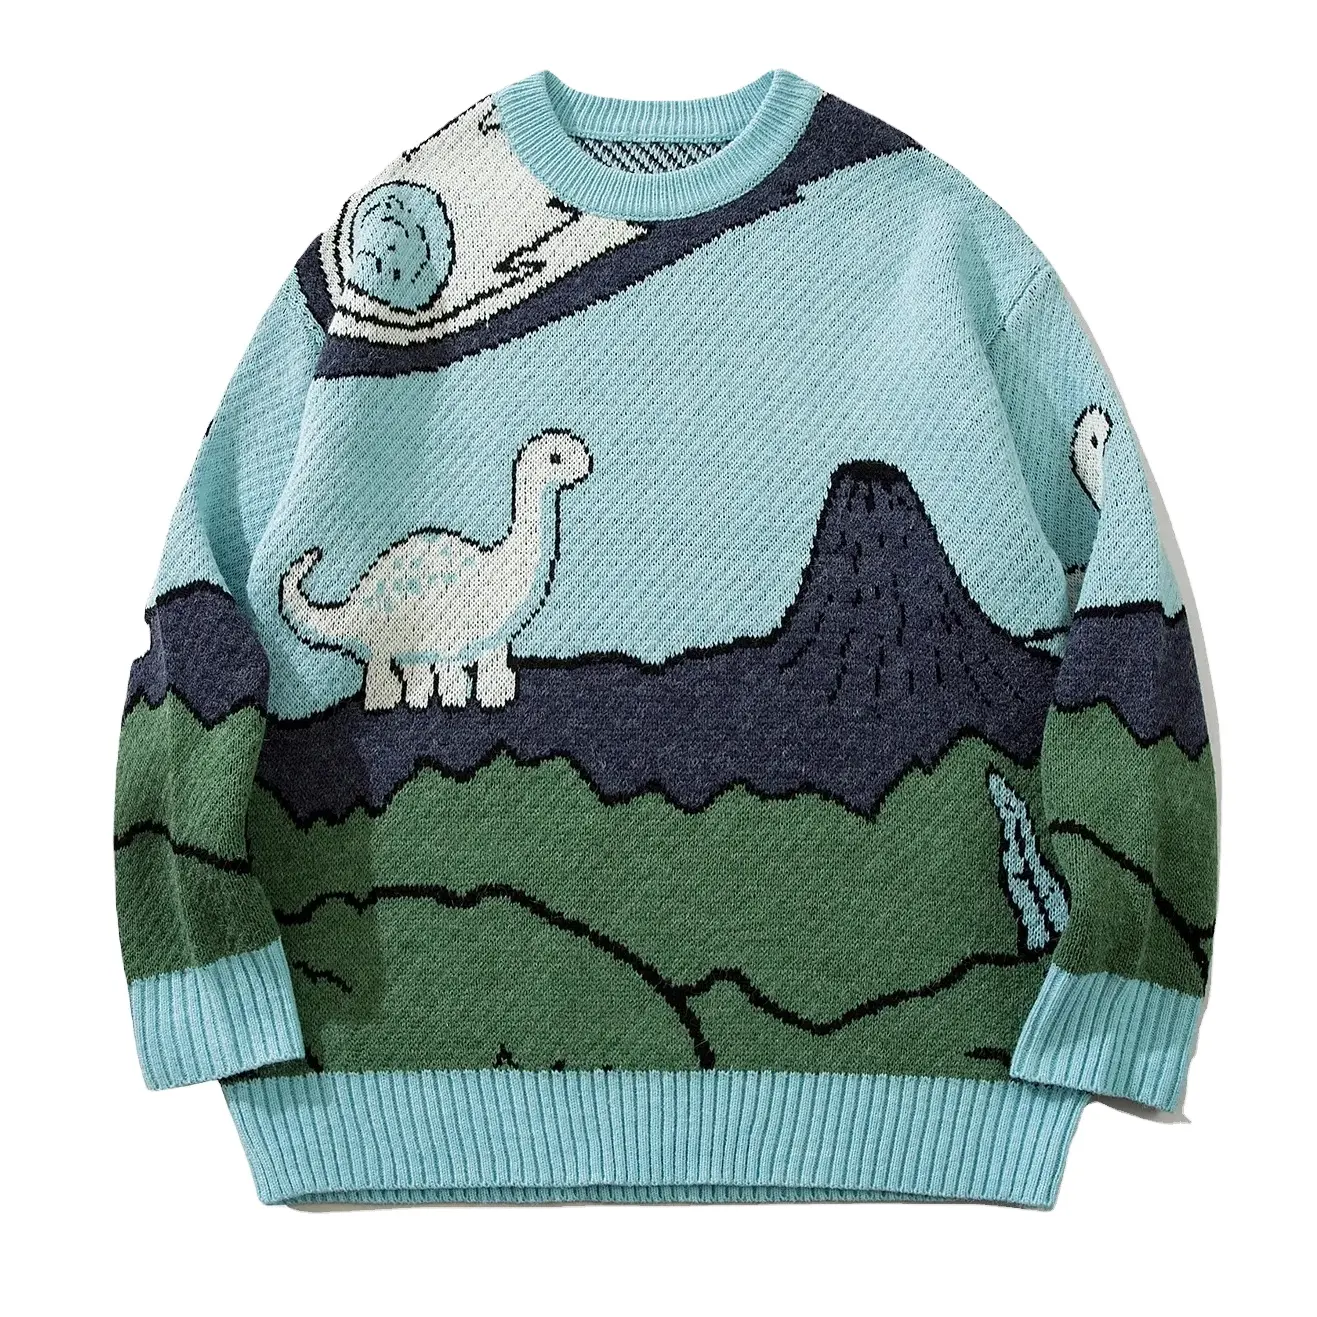 Fashionable Dinosaur Pattern Crewneck Sweater for Spring Men's O-Neck Pullover Viscose and Wool Anti-Shrink Knitwear for Men